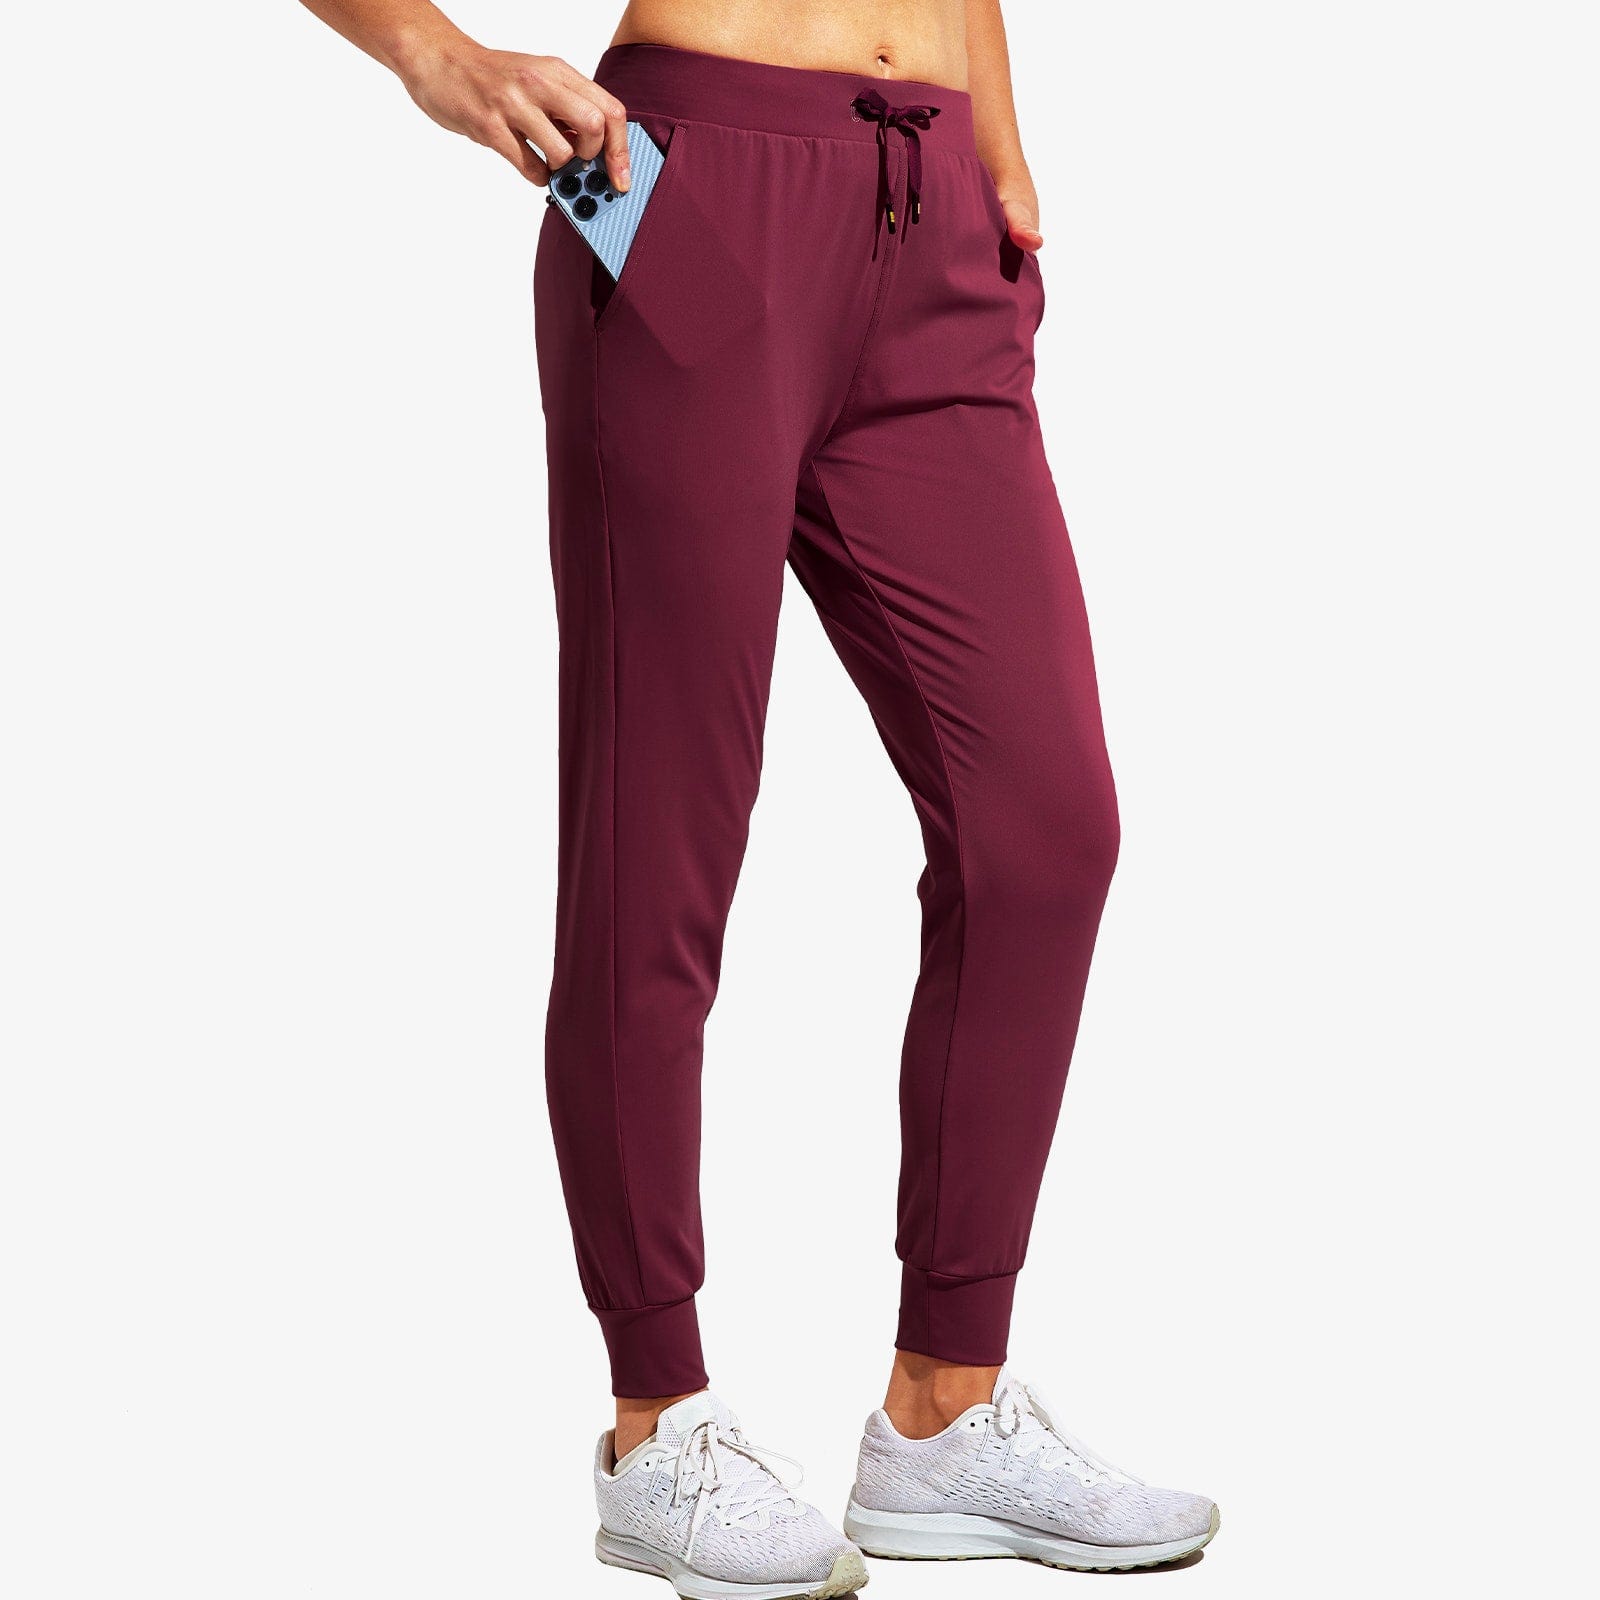 Women's Joggers with Pockets Lightweight Athletic Sweatpants – MIER